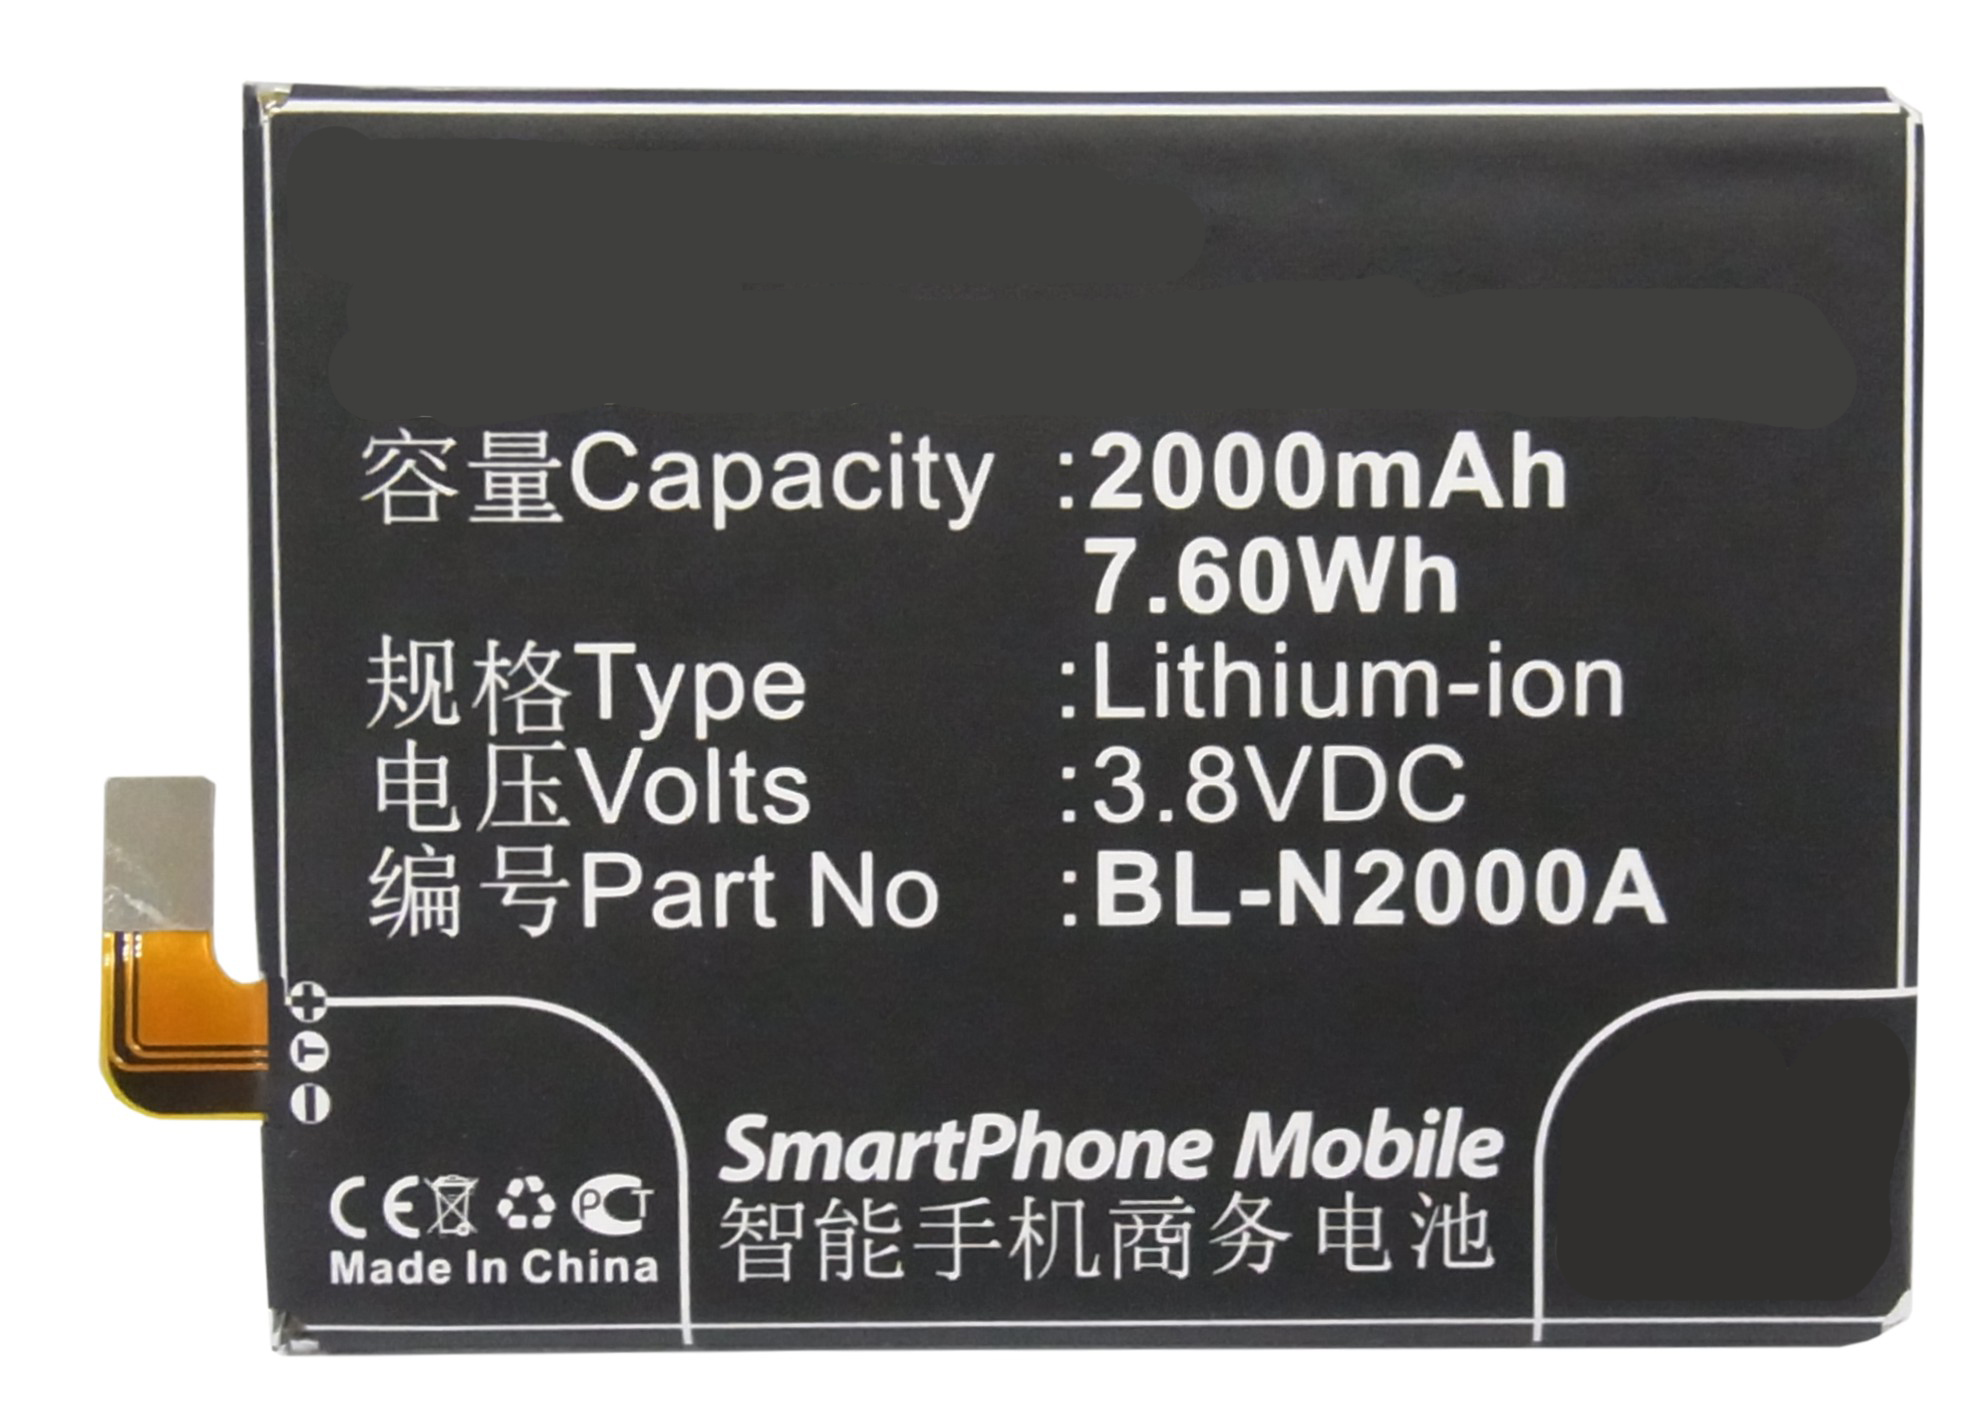 Synergy Digital Cell Phone Battery, Compatiable with BLU Cell Phone Battery (3.8V, Li-Pol, 2000mAh)